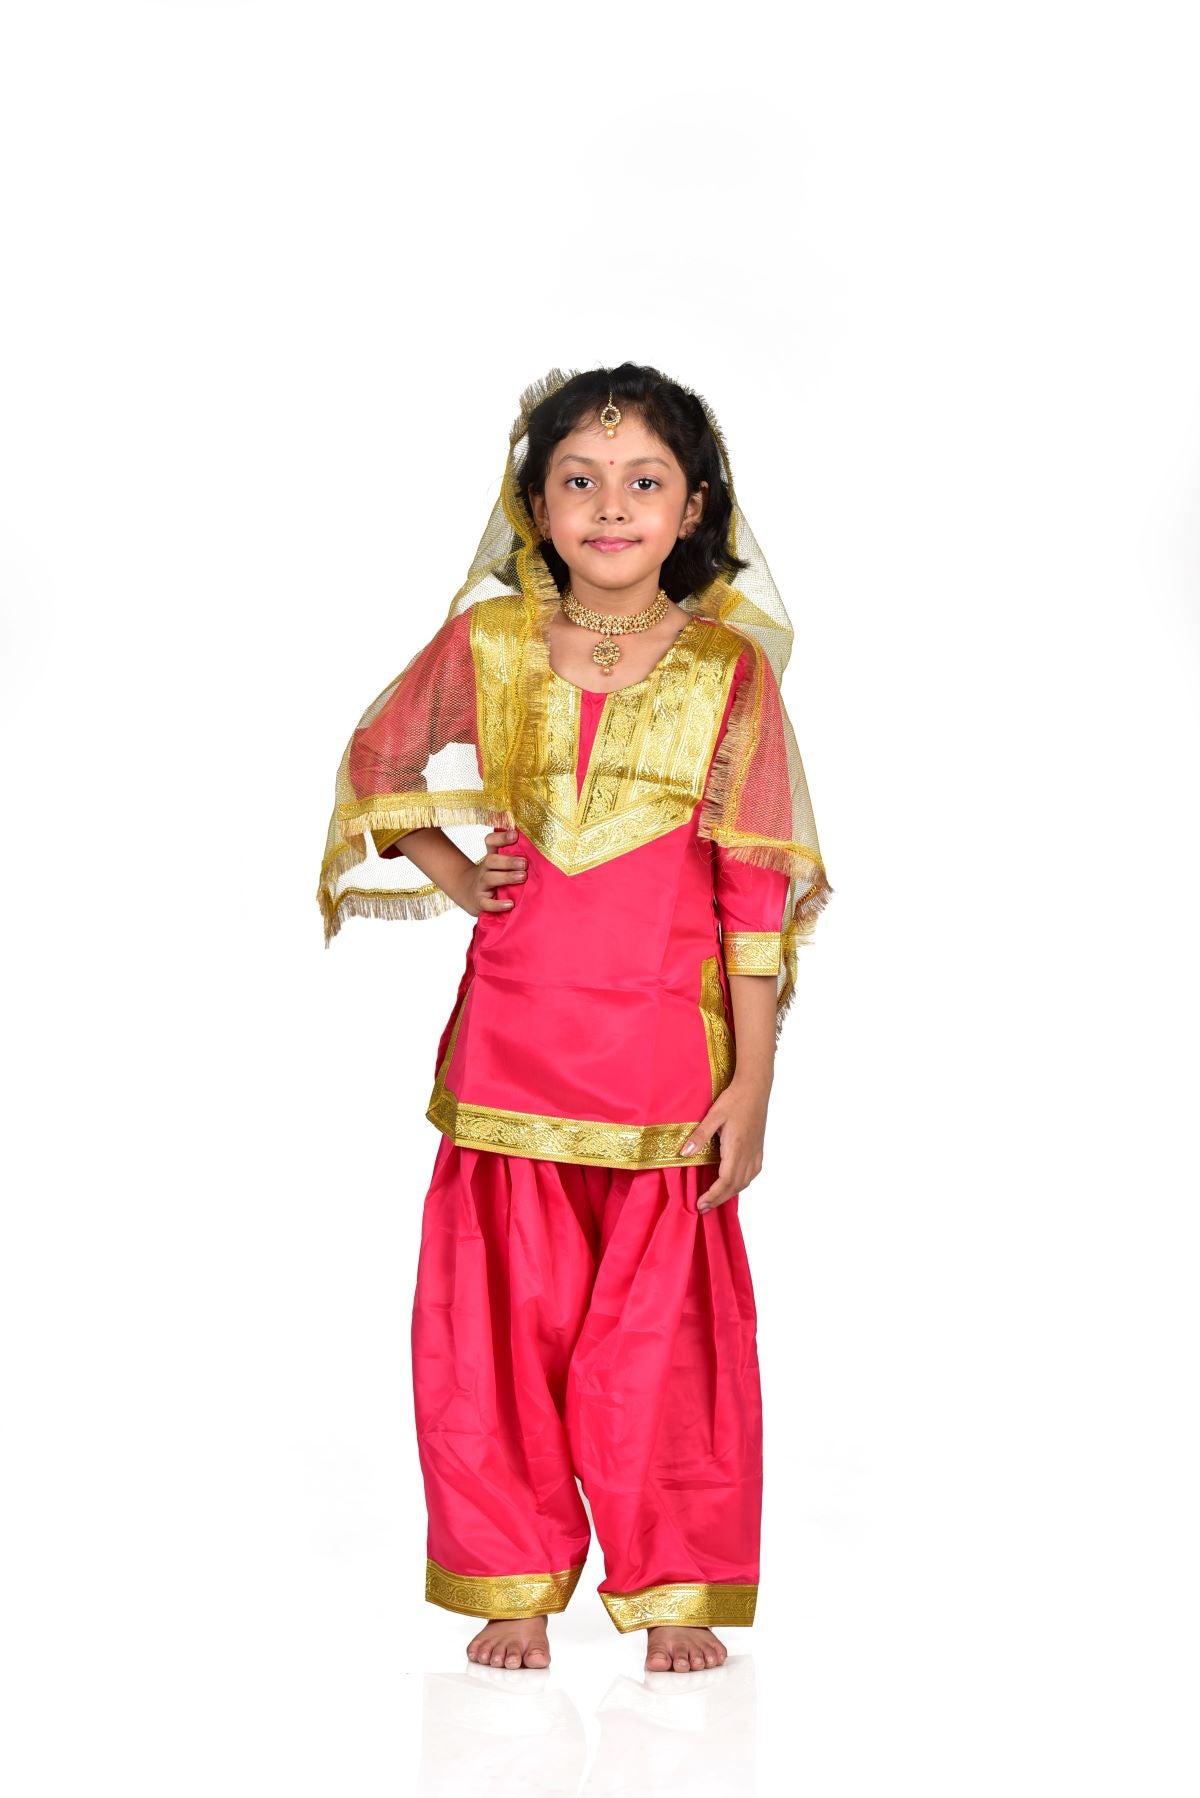 Classical Dance Costume Rental Services